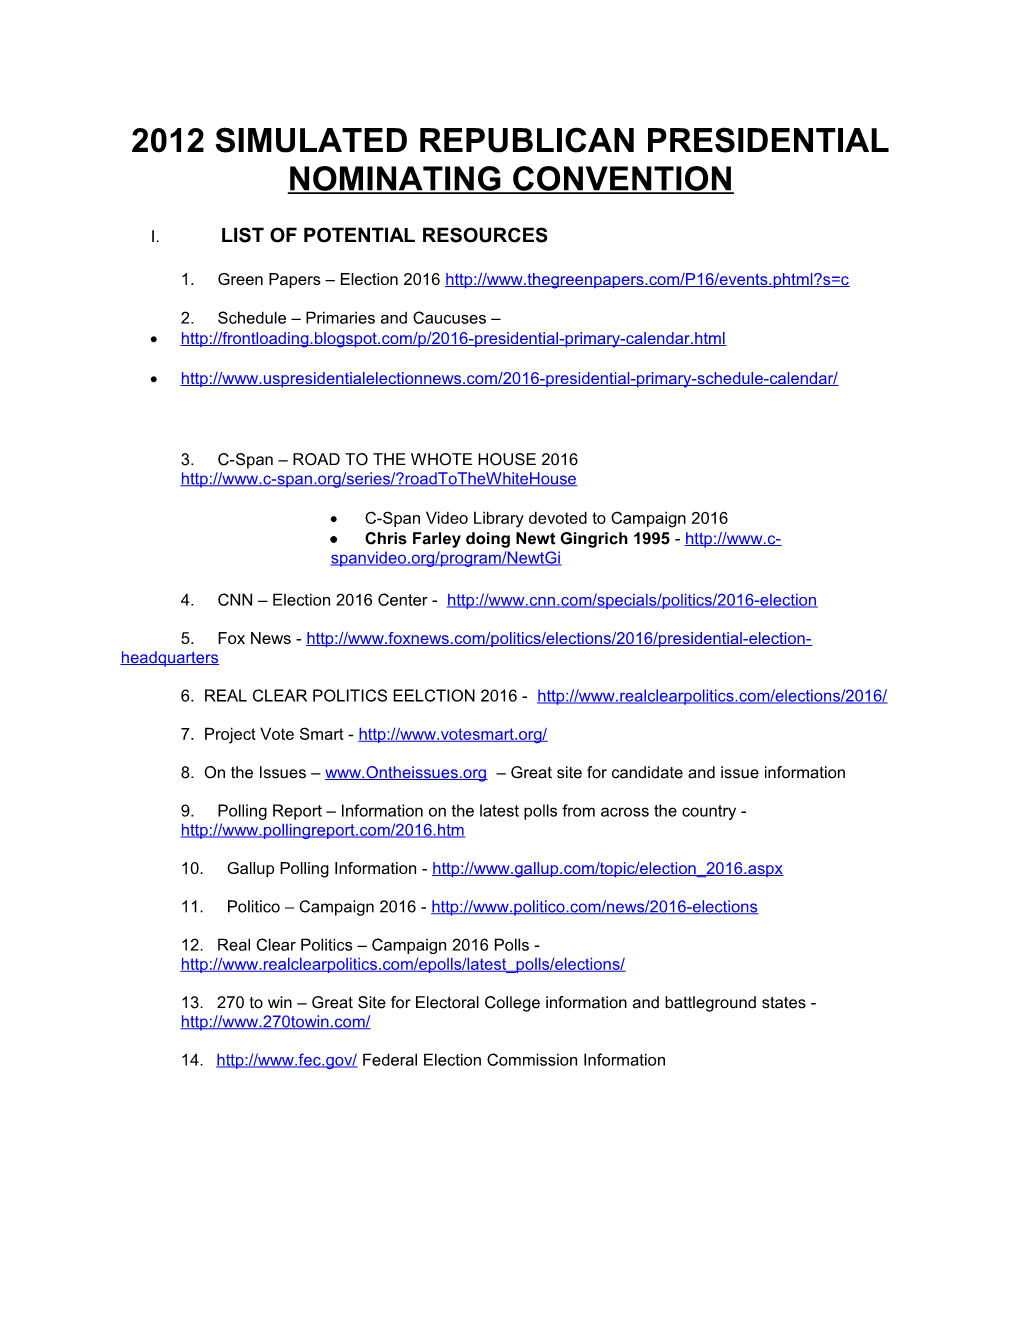 2012 Simulated Republican Presidential Nominating Convention